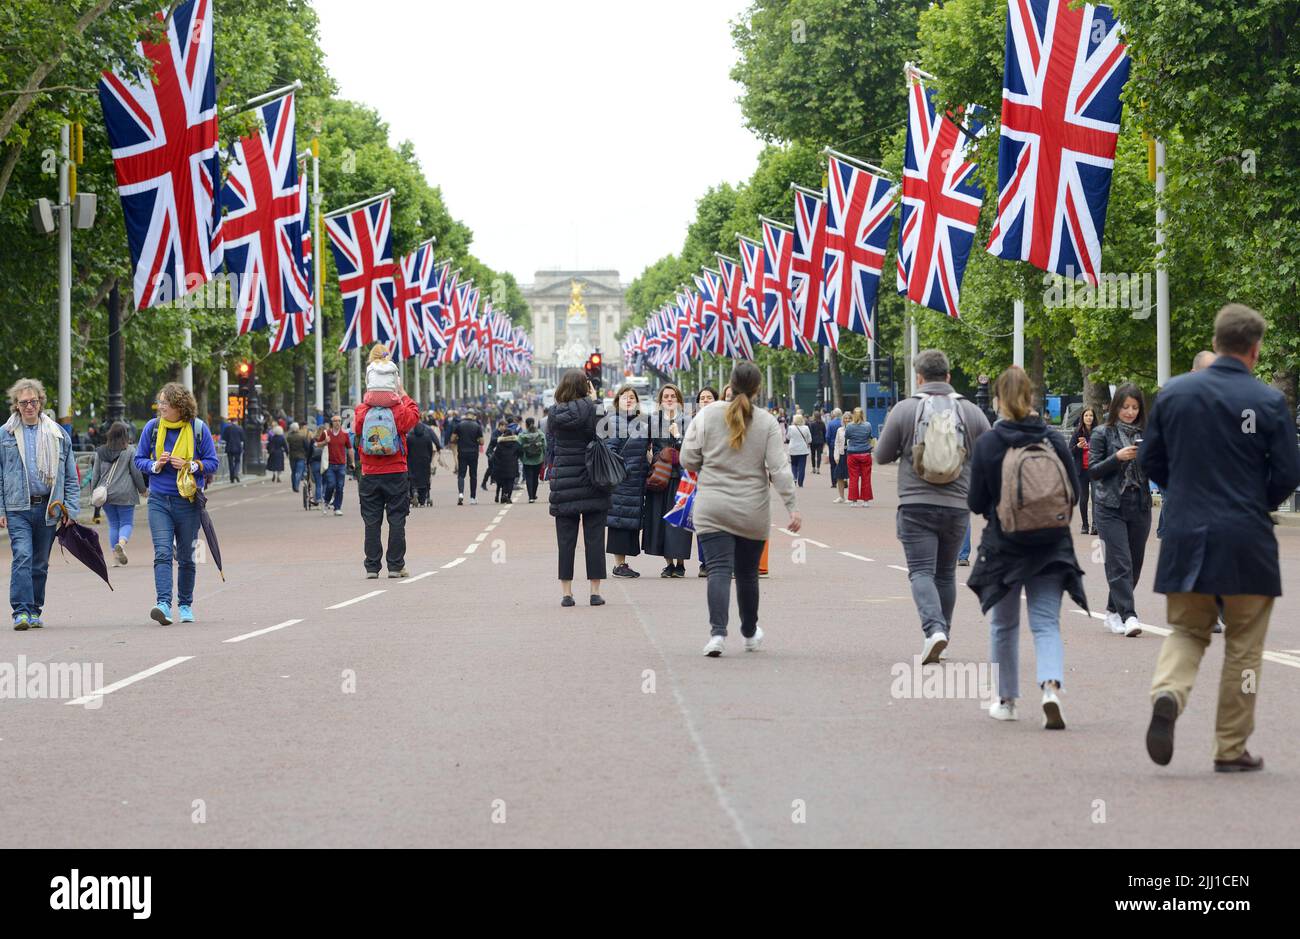 London, England, UK. People in The Mall while it is closed to traffic before the Queen's Platinum Jubilee celebrations, 30th May 2022 Stock Photo